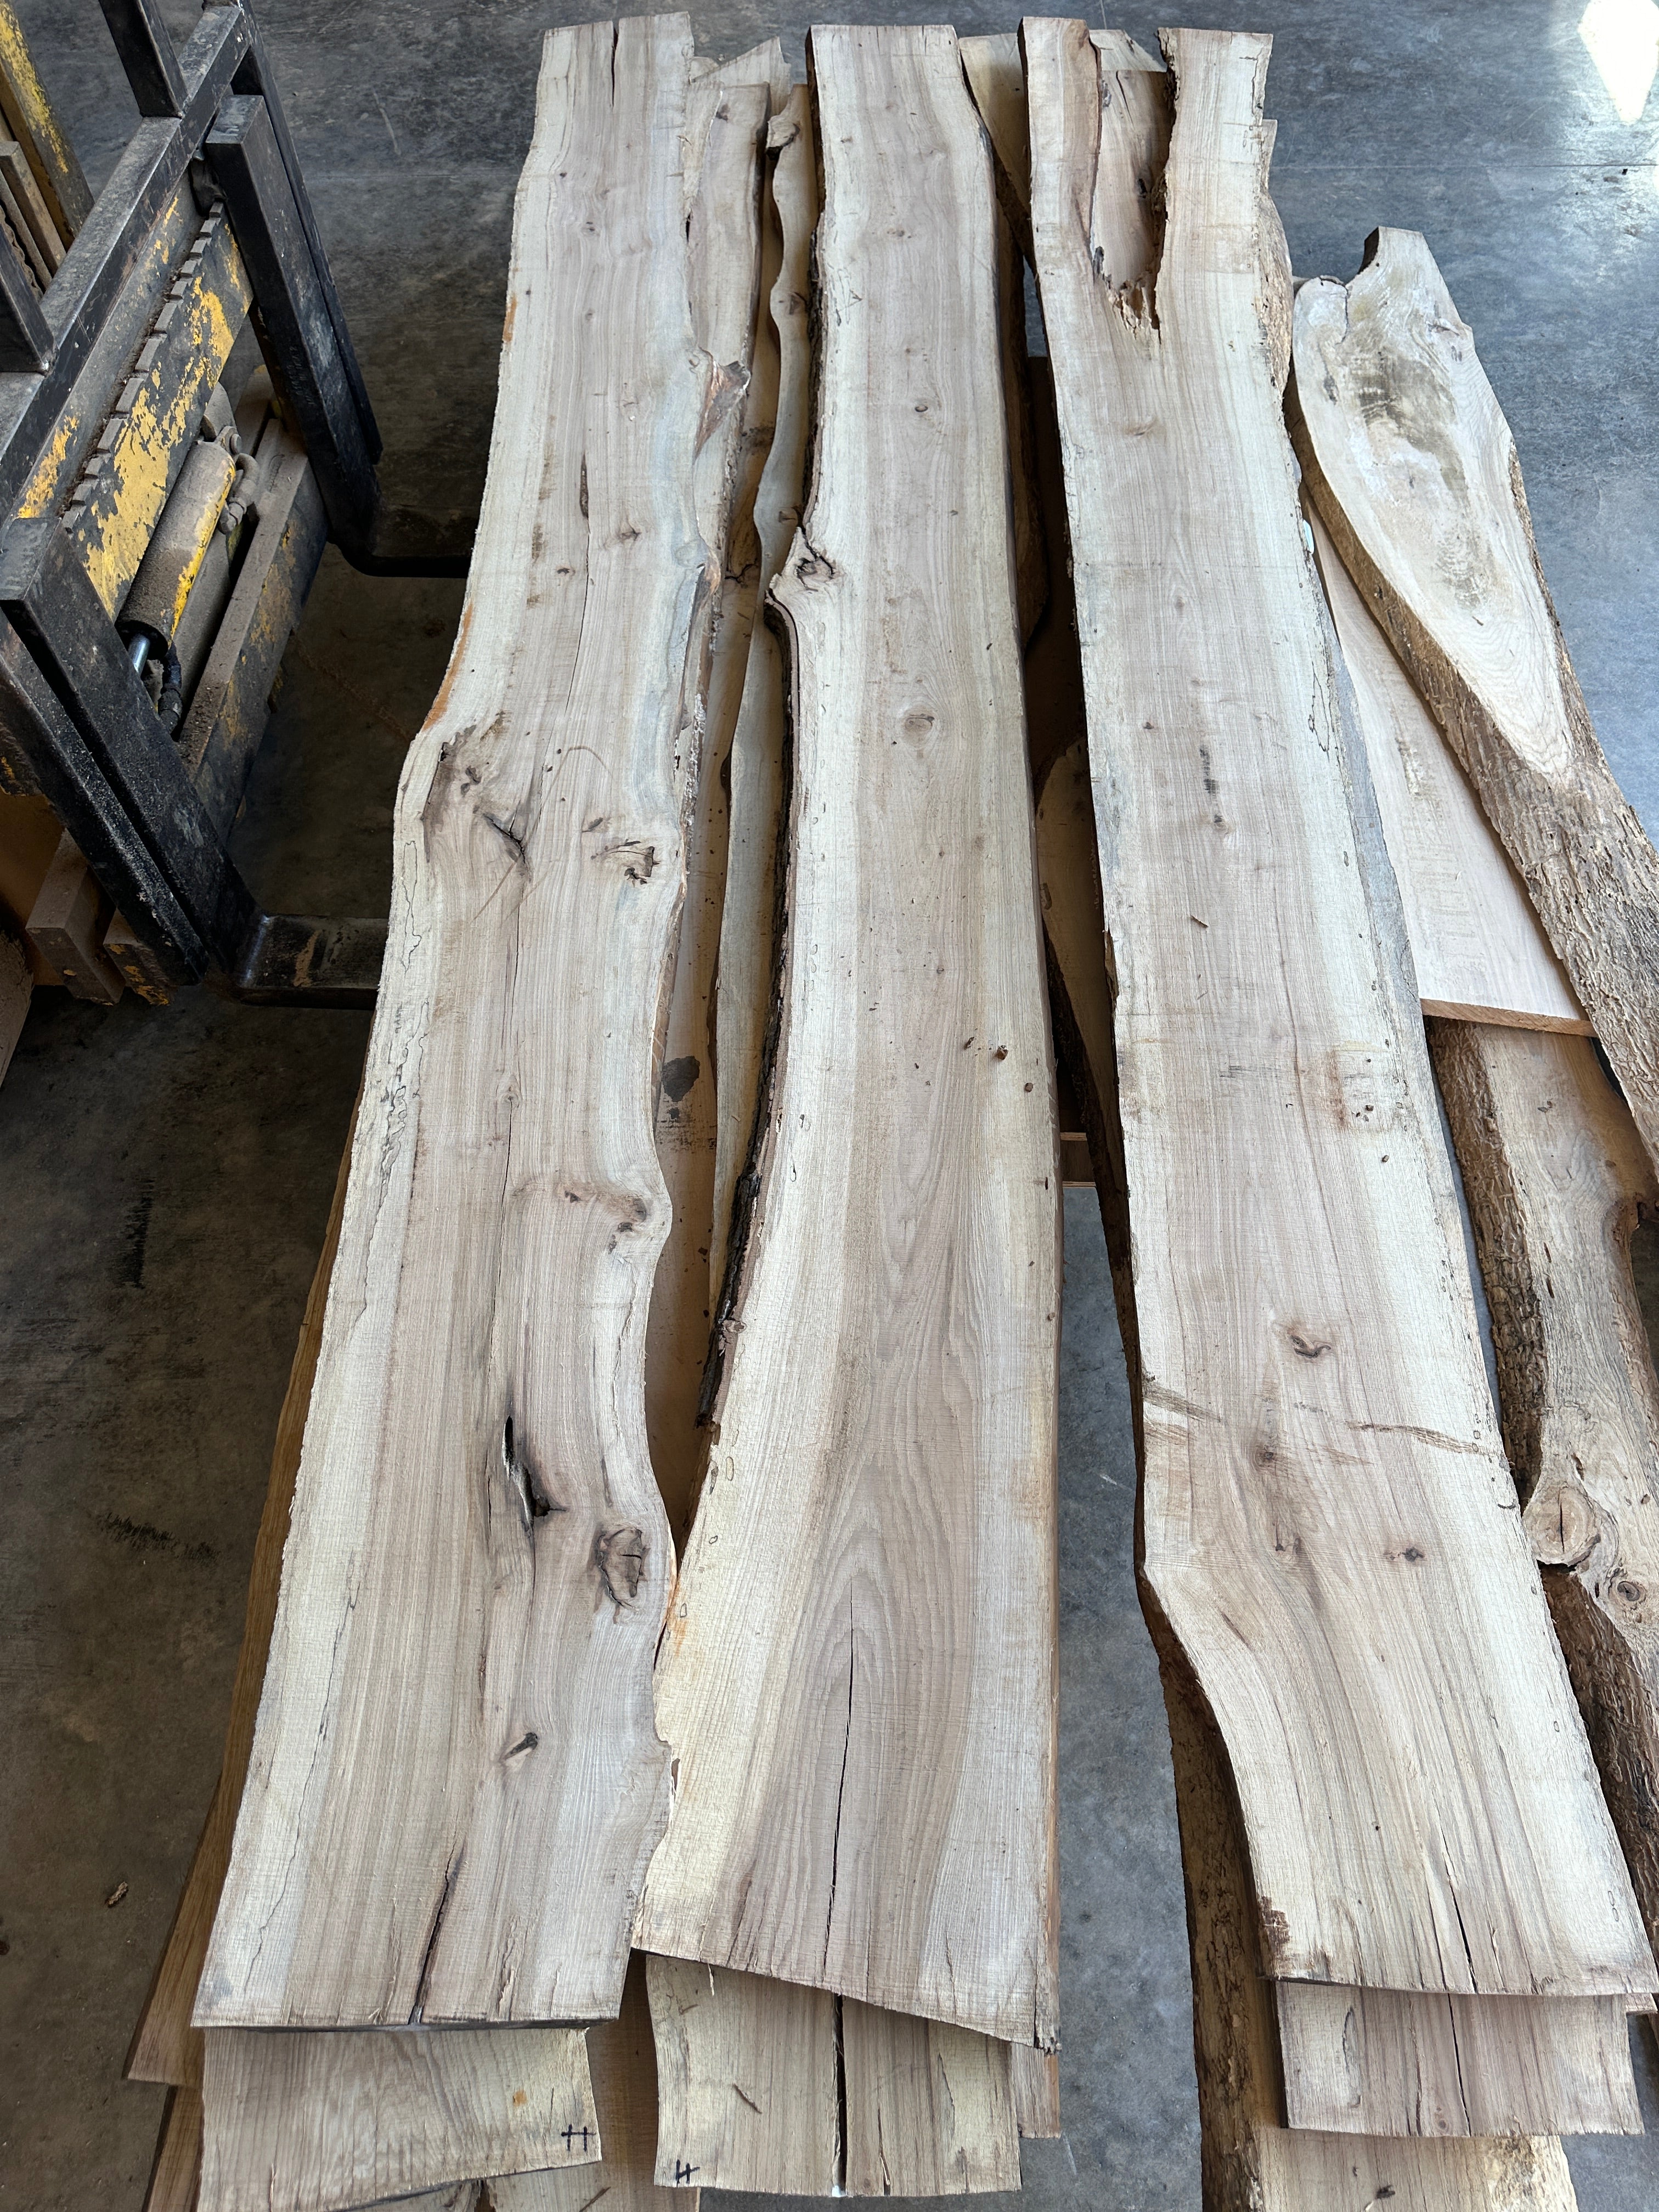 Hickory Live-edge slabs 4/4, *pickup only*